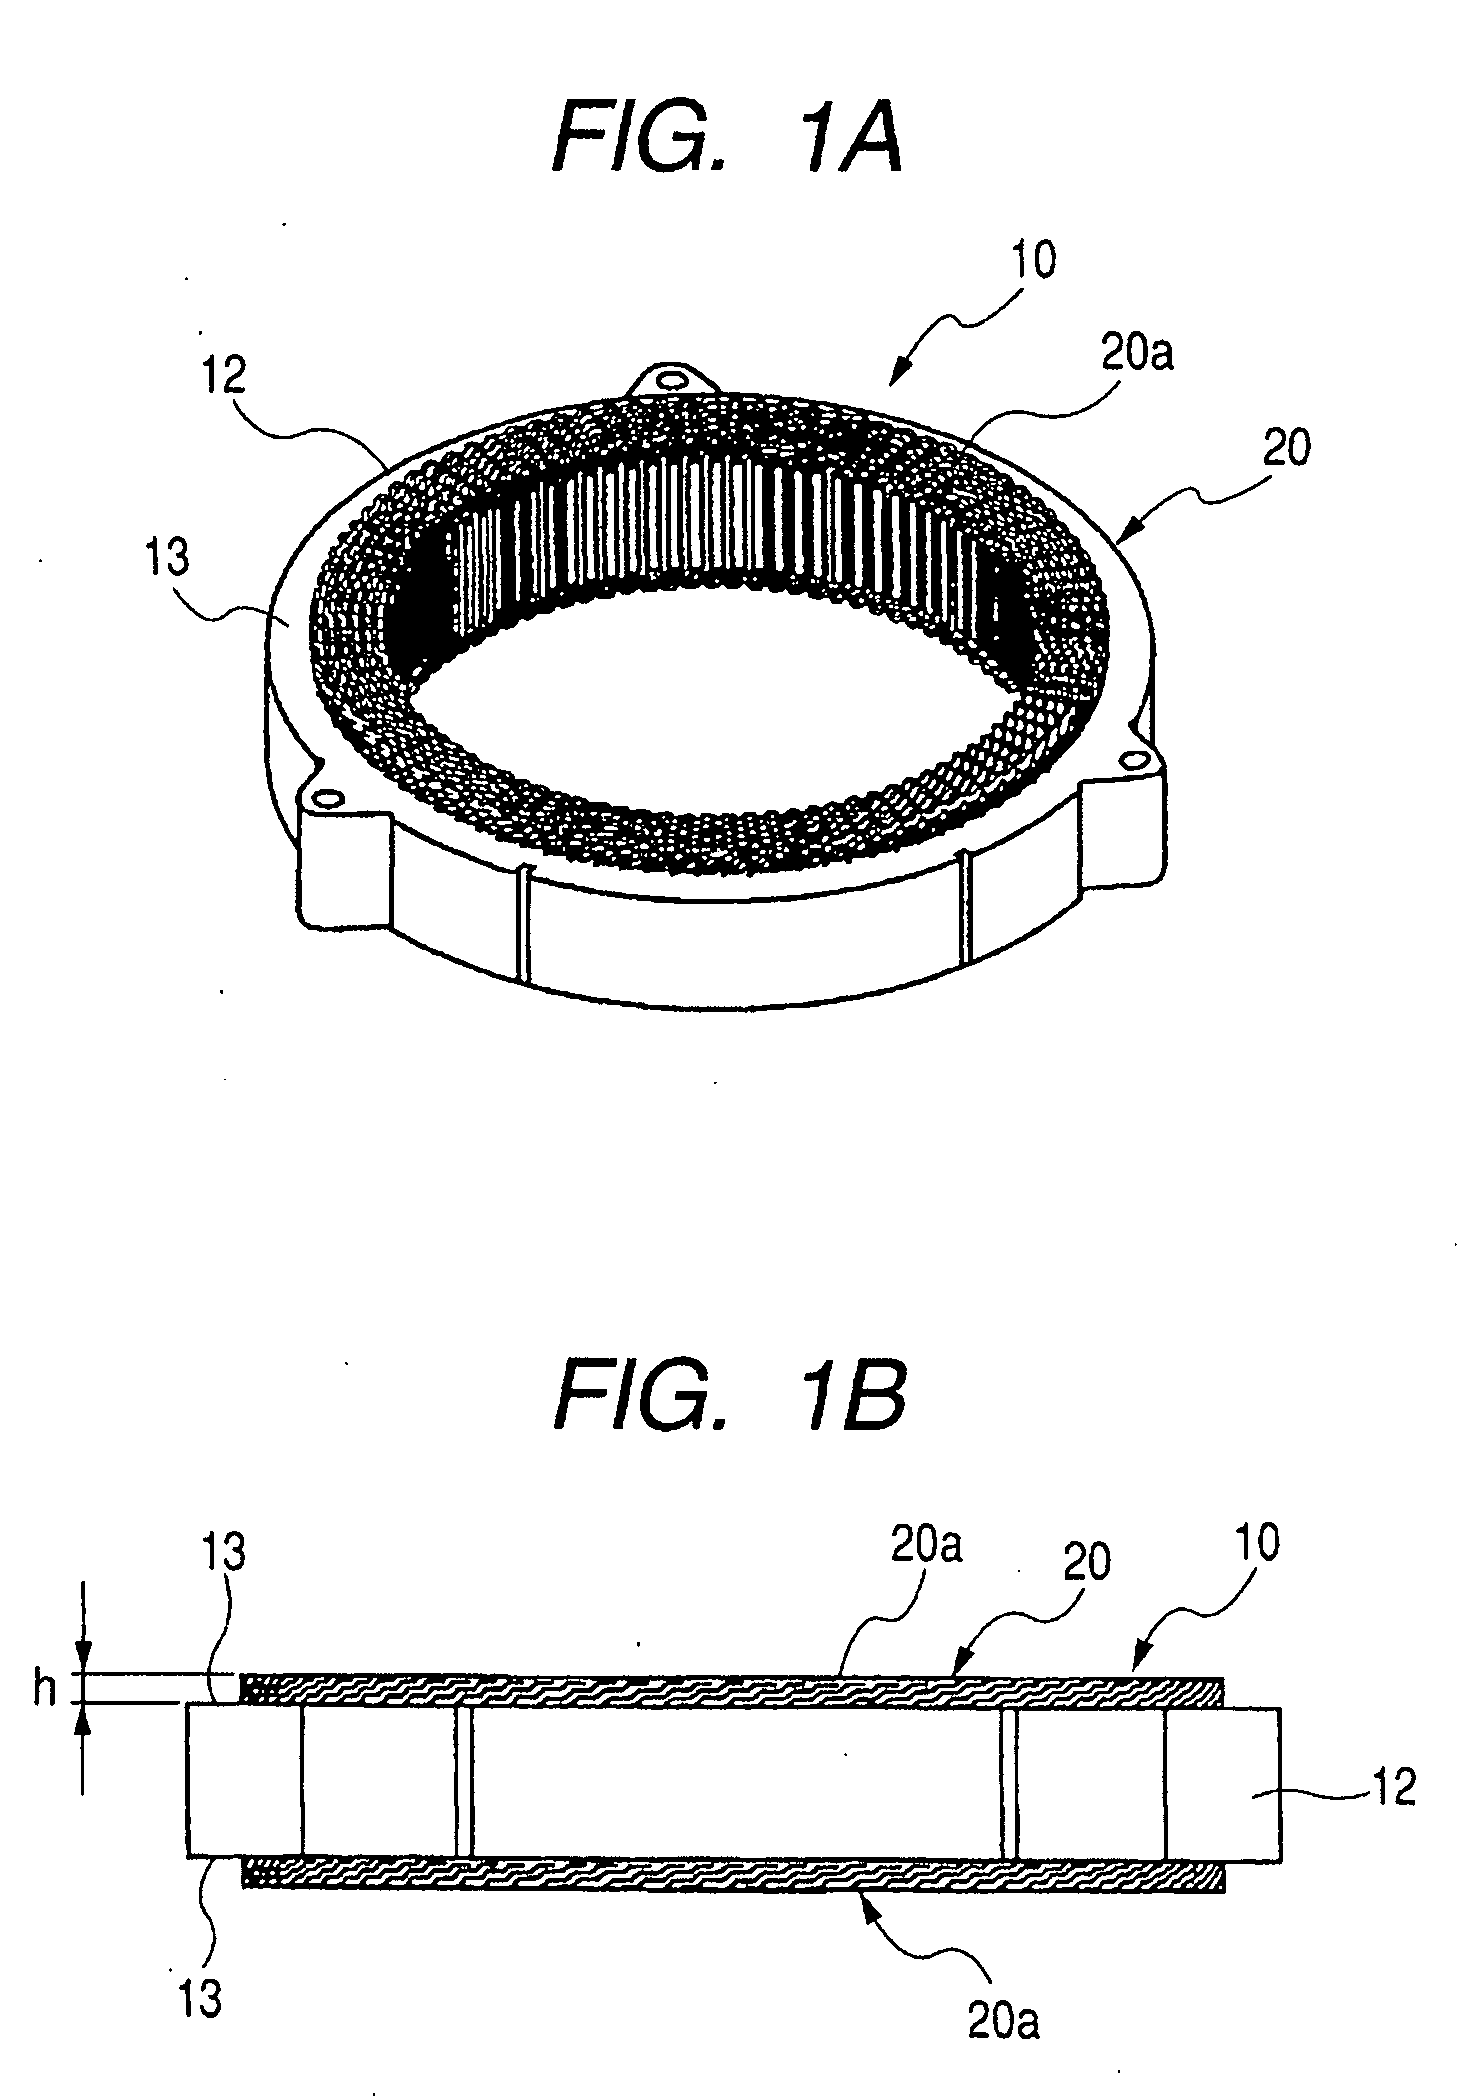 Method of manufacturing coil assembly